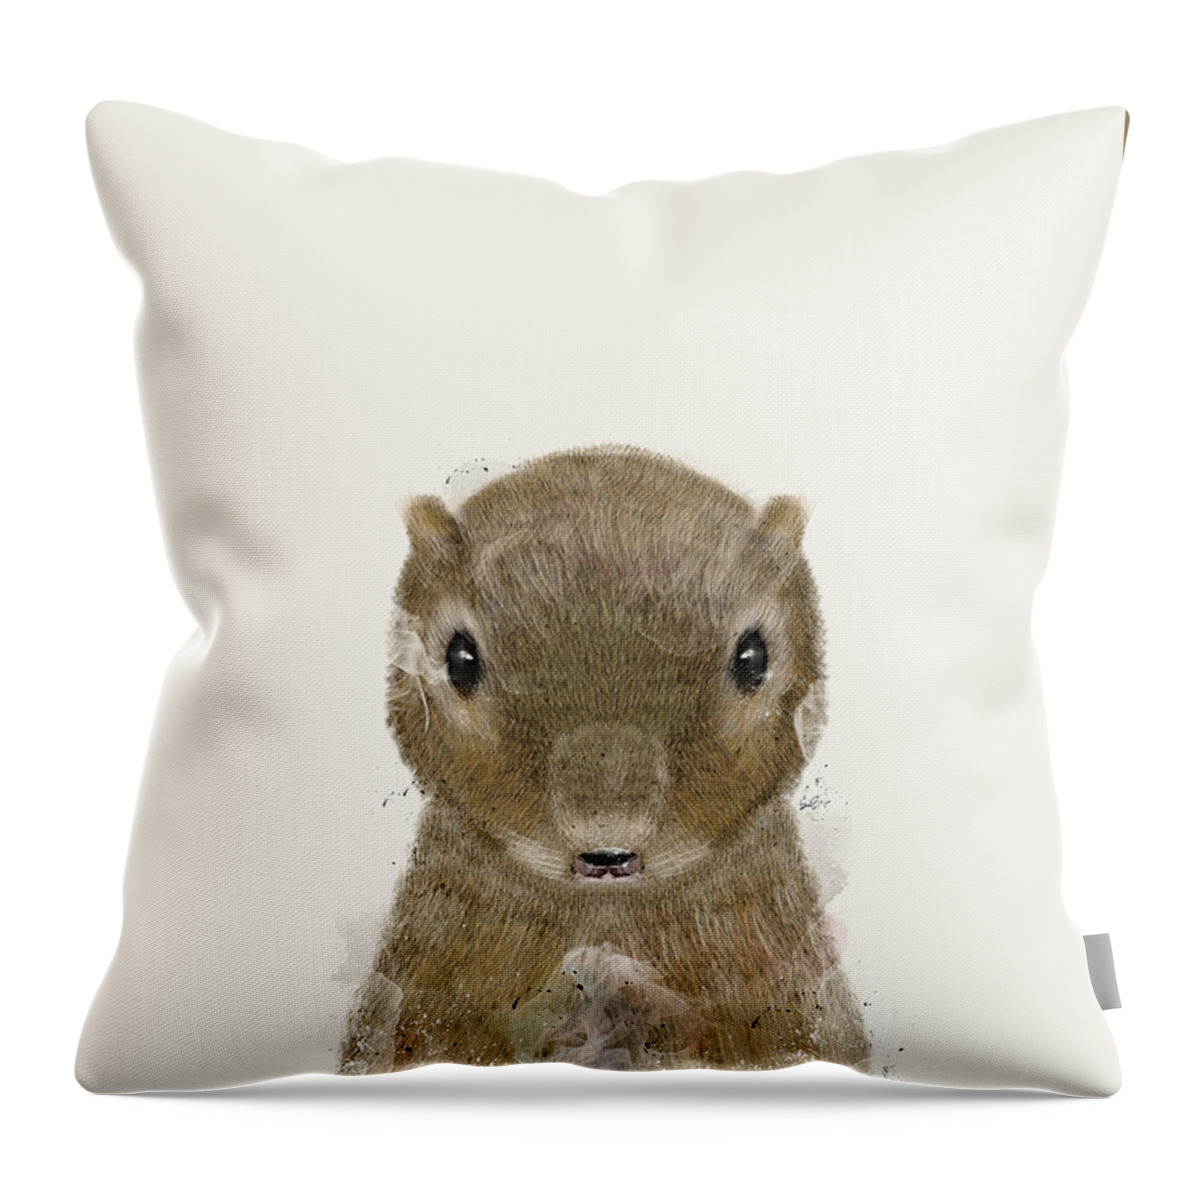 Squirrels Throw Pillow featuring the painting Little Squirrel by Bri Buckley